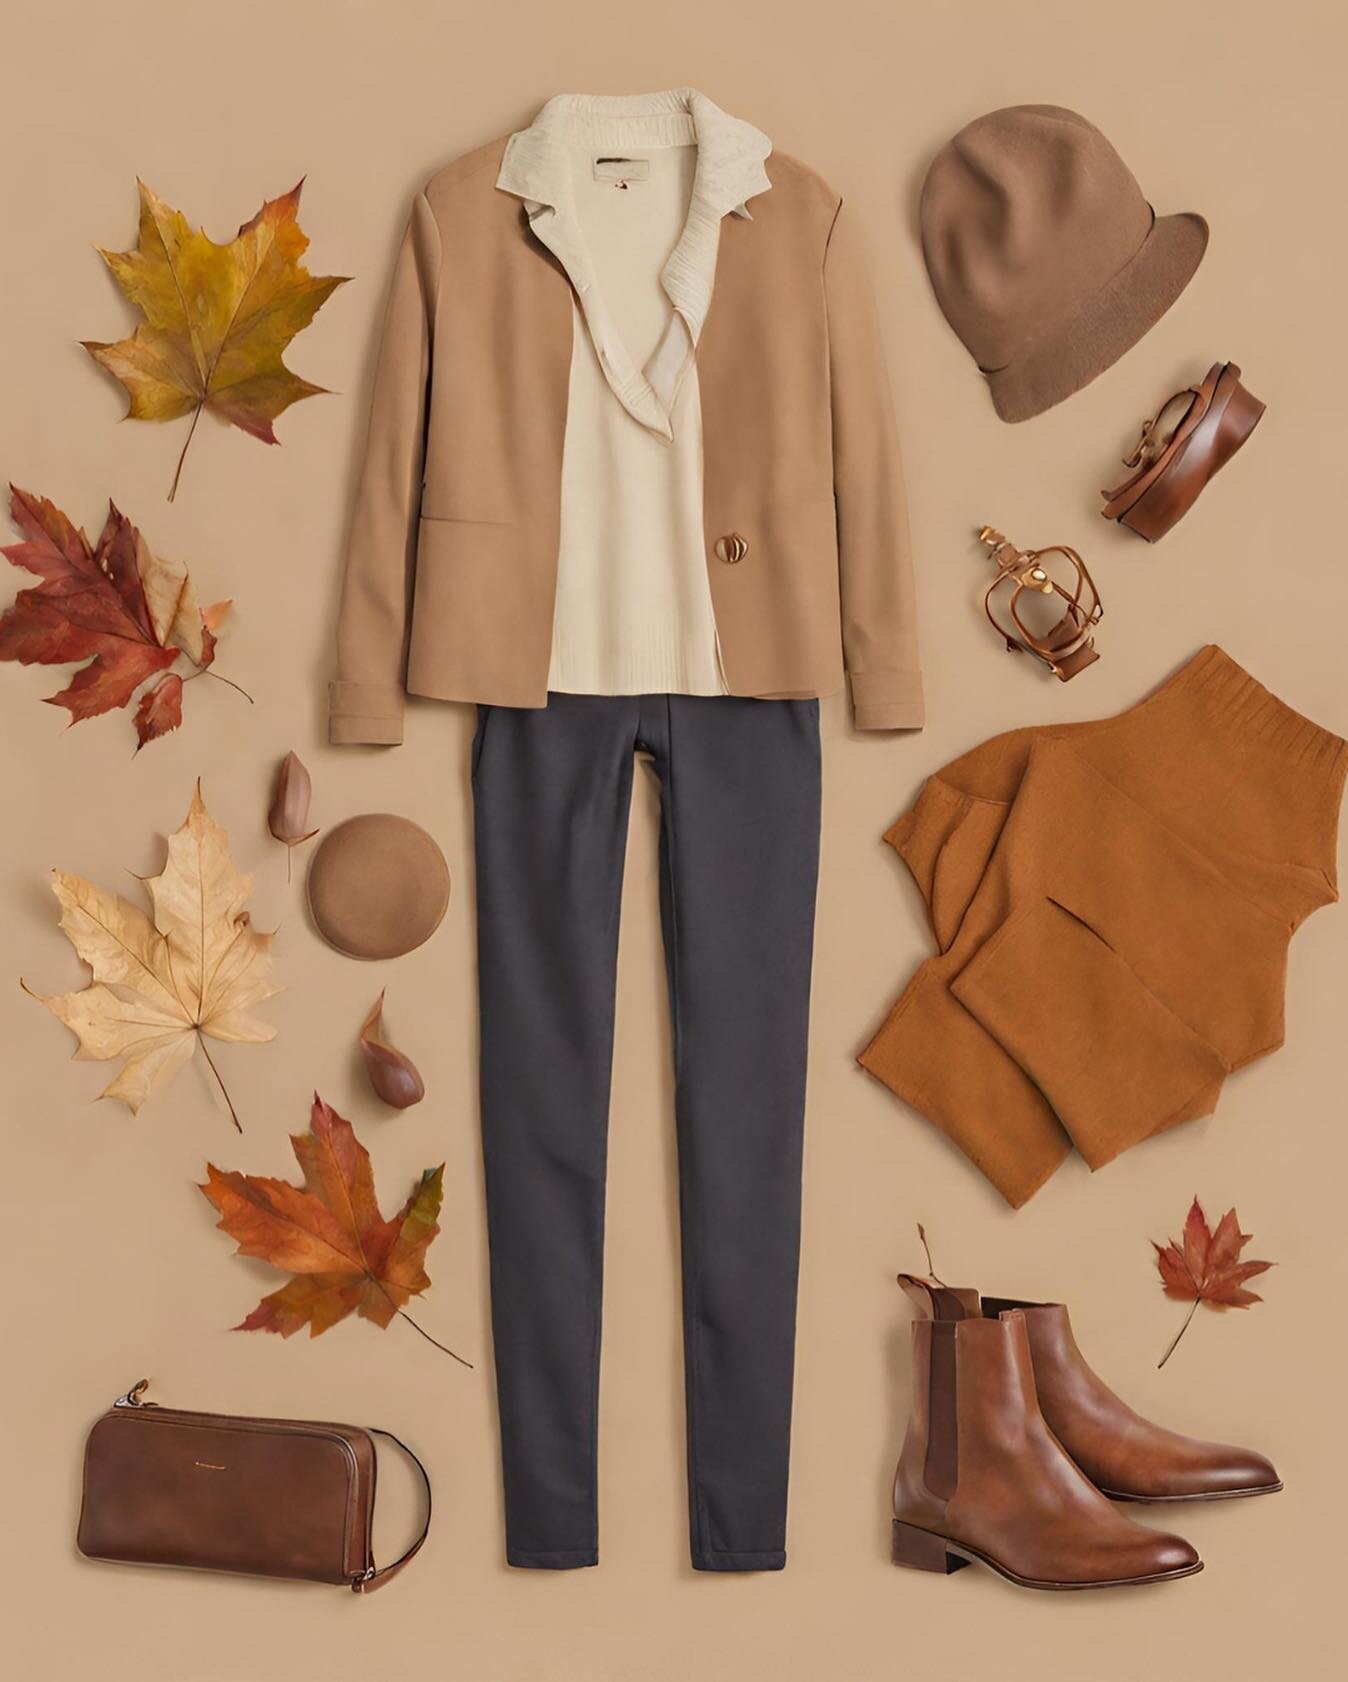 Embrace the autumn aura. 🤎

Our fall fashion lineup is ready to make a statement. Dive into the details and tell us which fall piece is a MUST for you? 

#FashionPalette #FallFashionJourney #StatementStyle